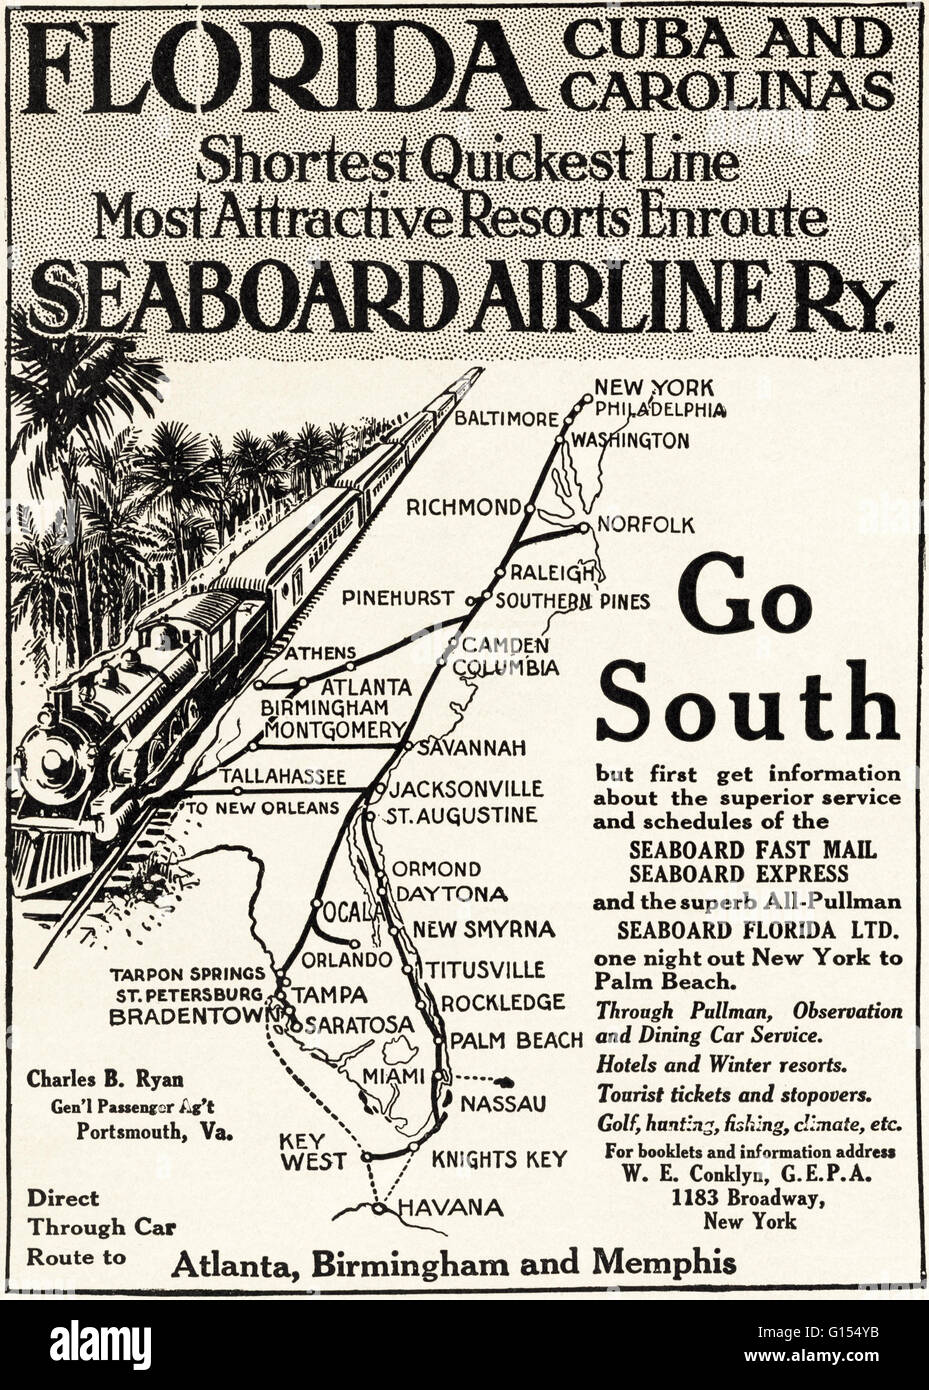 Original old vintage American magazine advert from the Edwardian era dated 1910. Advertisement advertising Florida Cuba & Carilinas by Seaboard Airline Railway USA Stock Photo